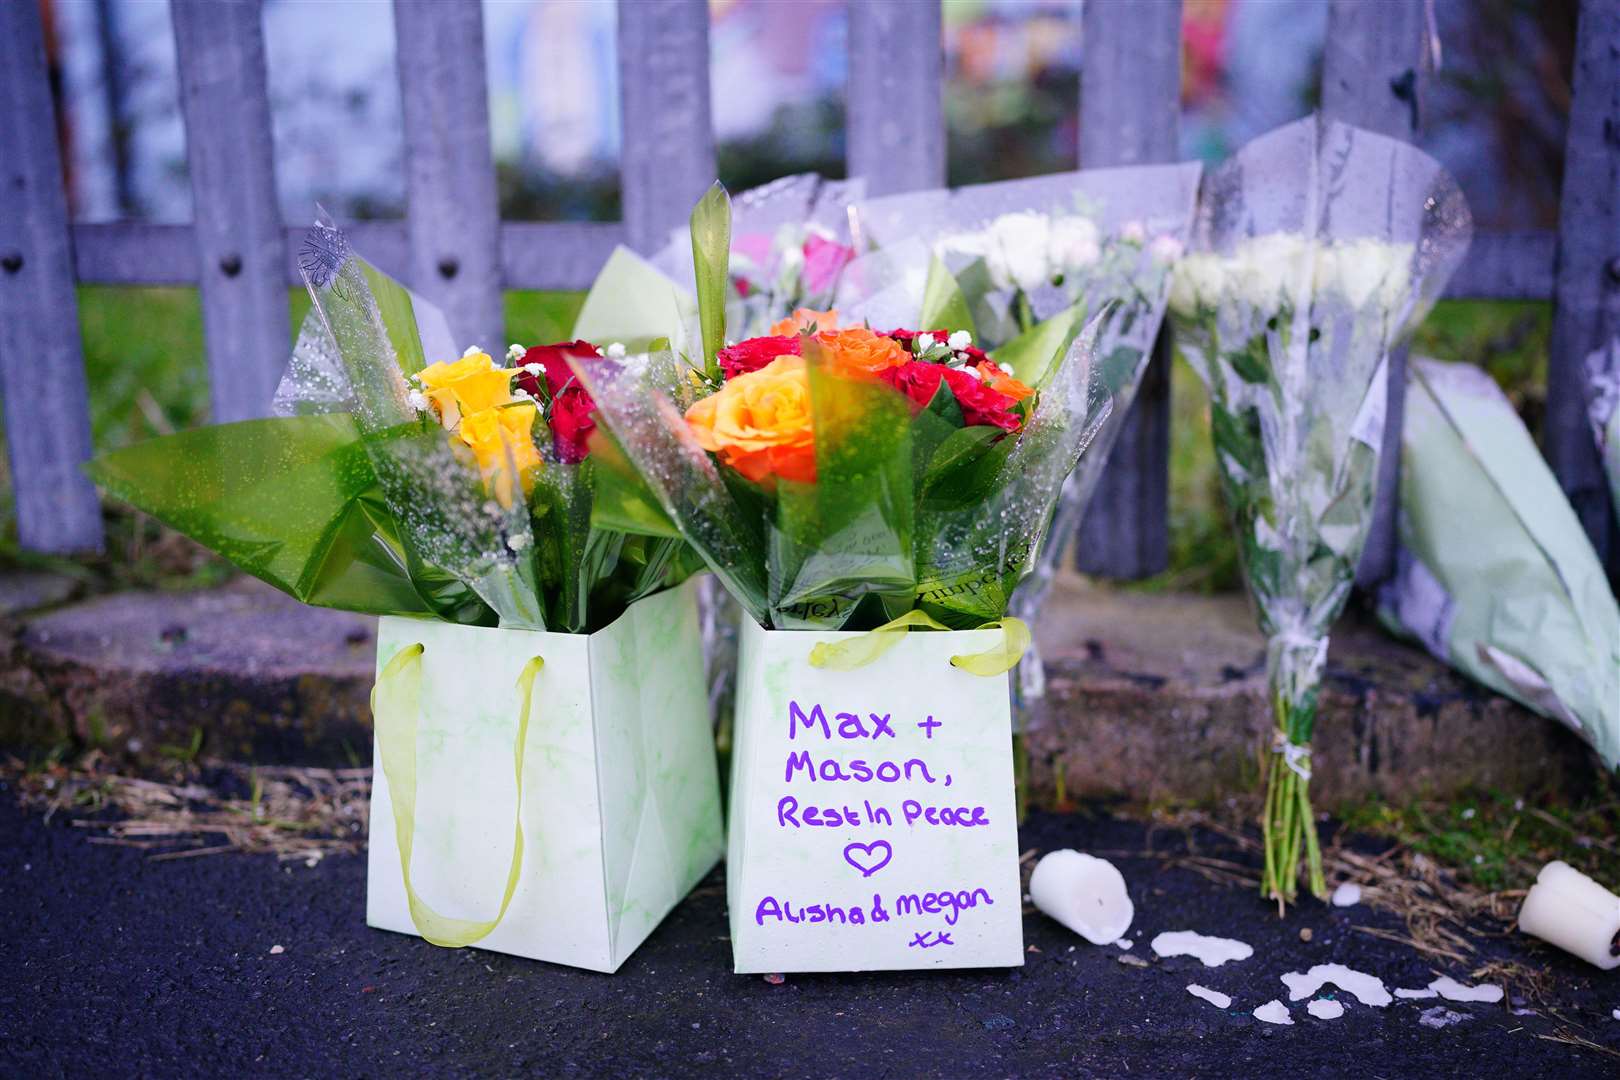 Flowers and tributes were left close to the scene (Ben Birchall/PA)